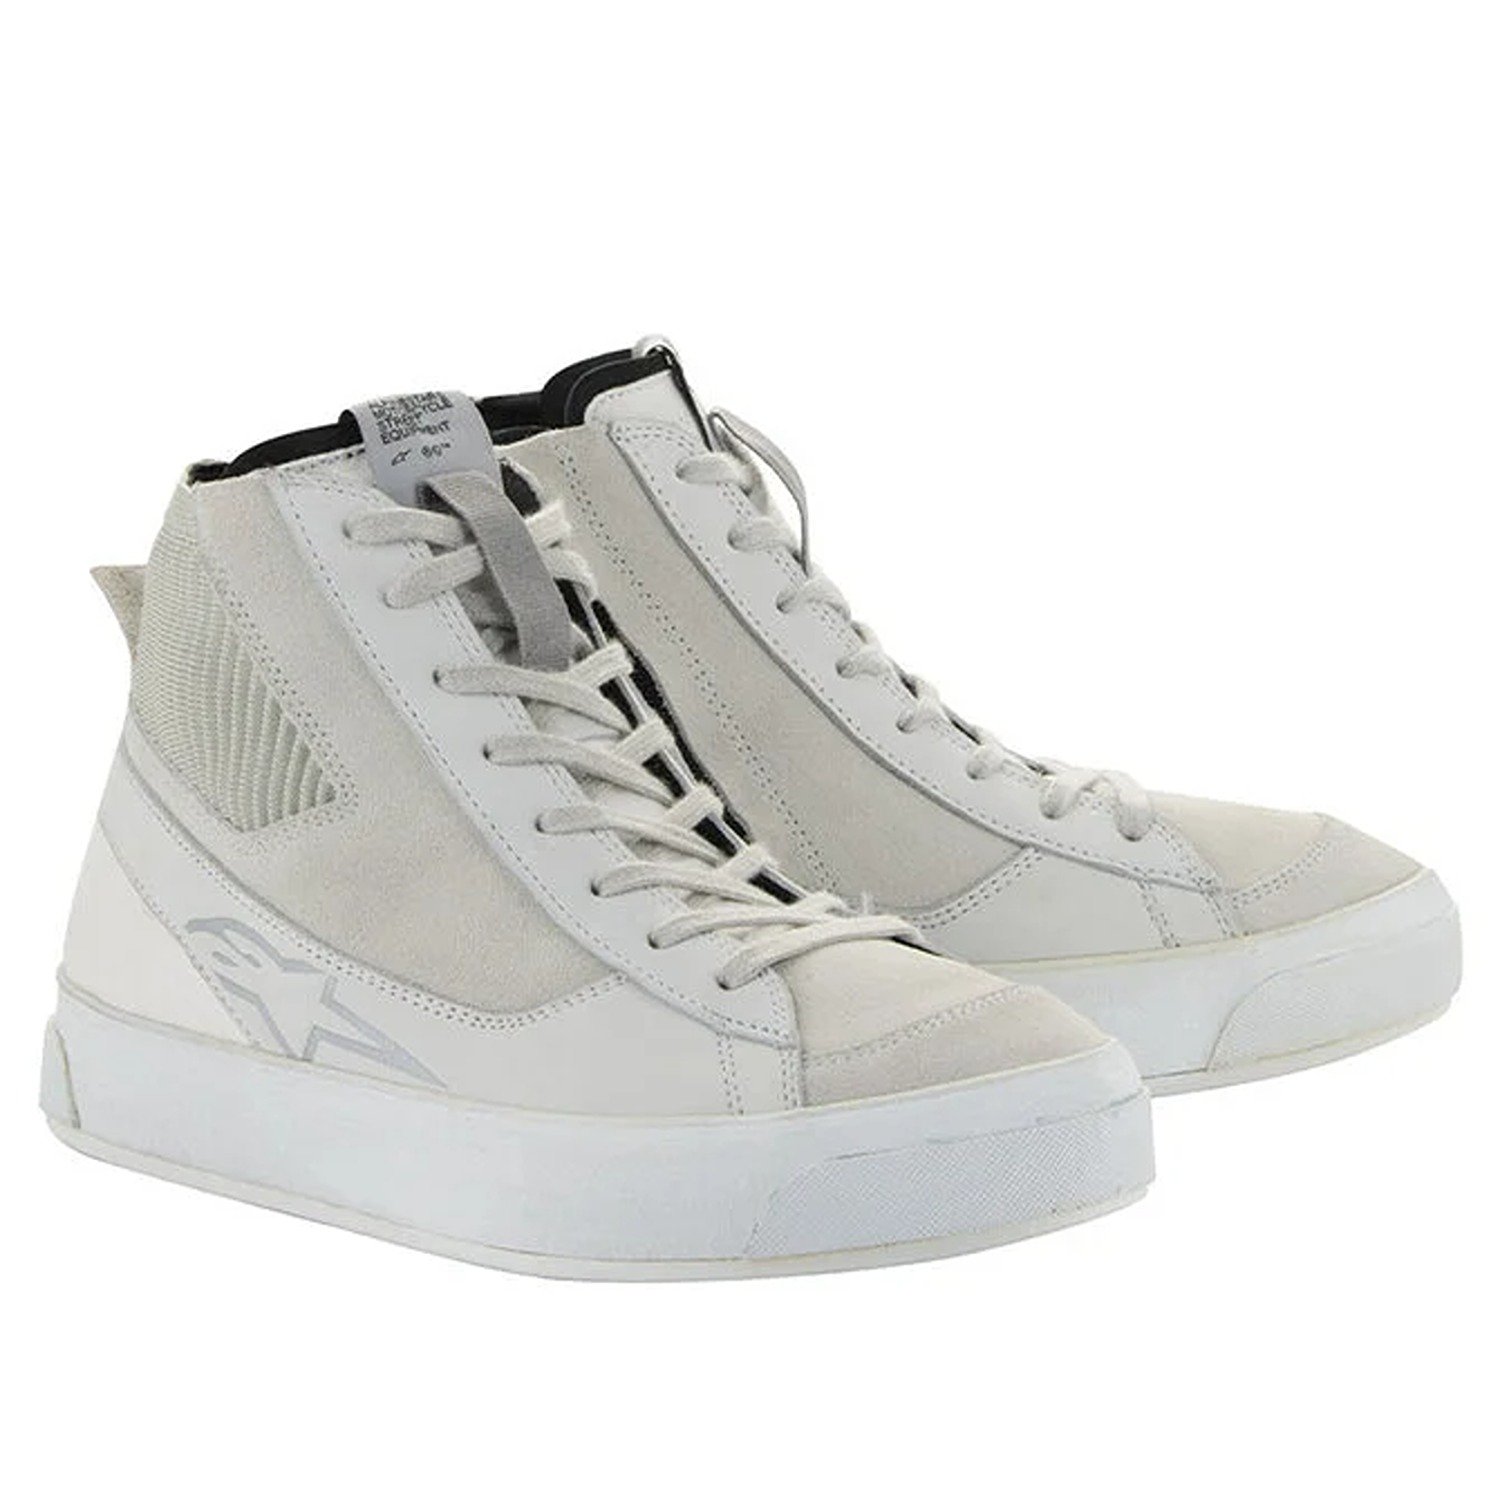 Image of Alpinestars Stated Shoes White Cool Gray Talla US 14